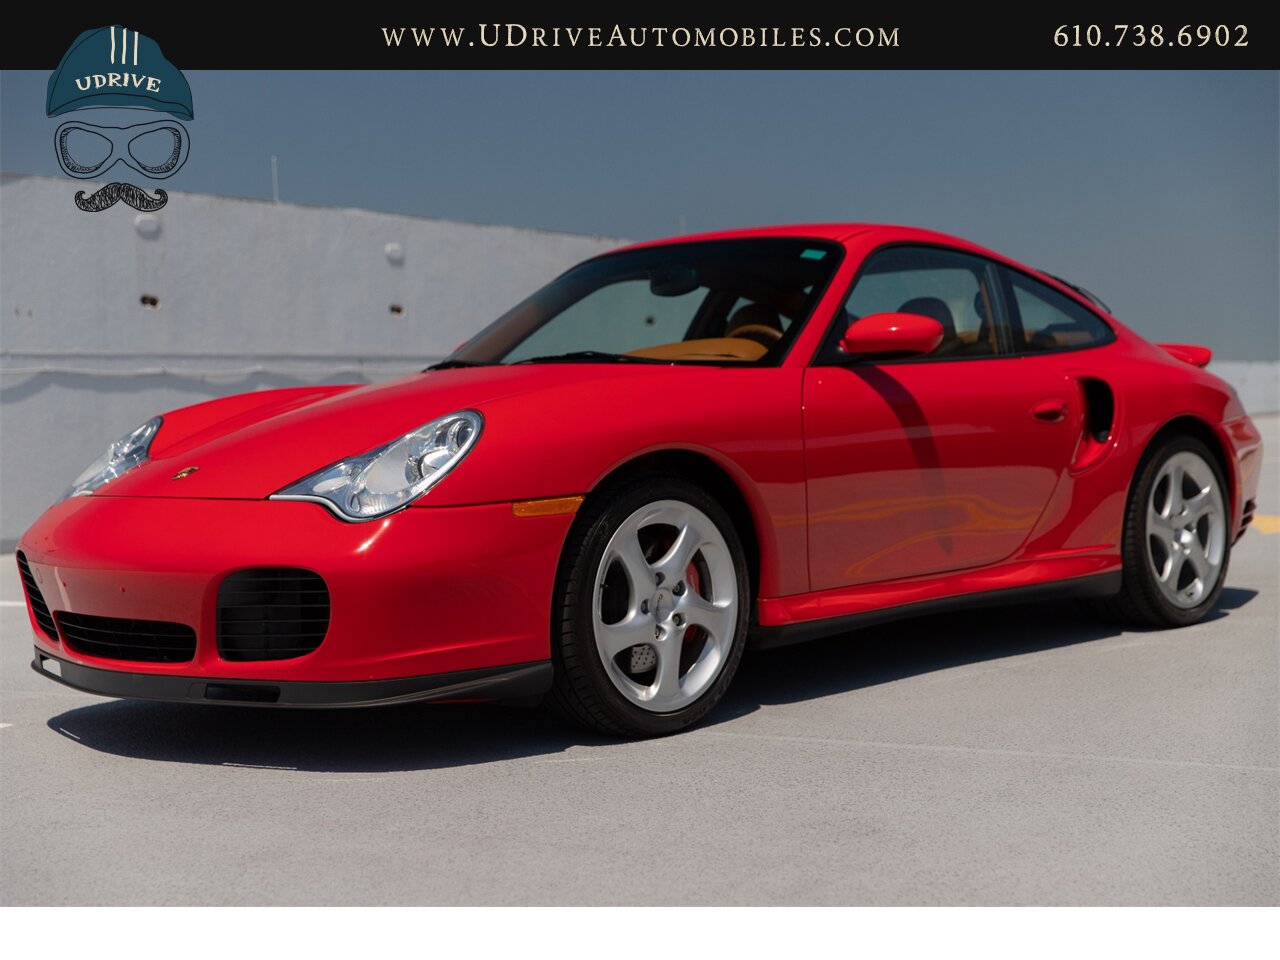 2003 Porsche 911 Turbo 996 Turbo X50 Power Kit 6 Speed Manual  Rare Color Guards Red over Brown Natural Leather - Photo 11 - West Chester, PA 19382